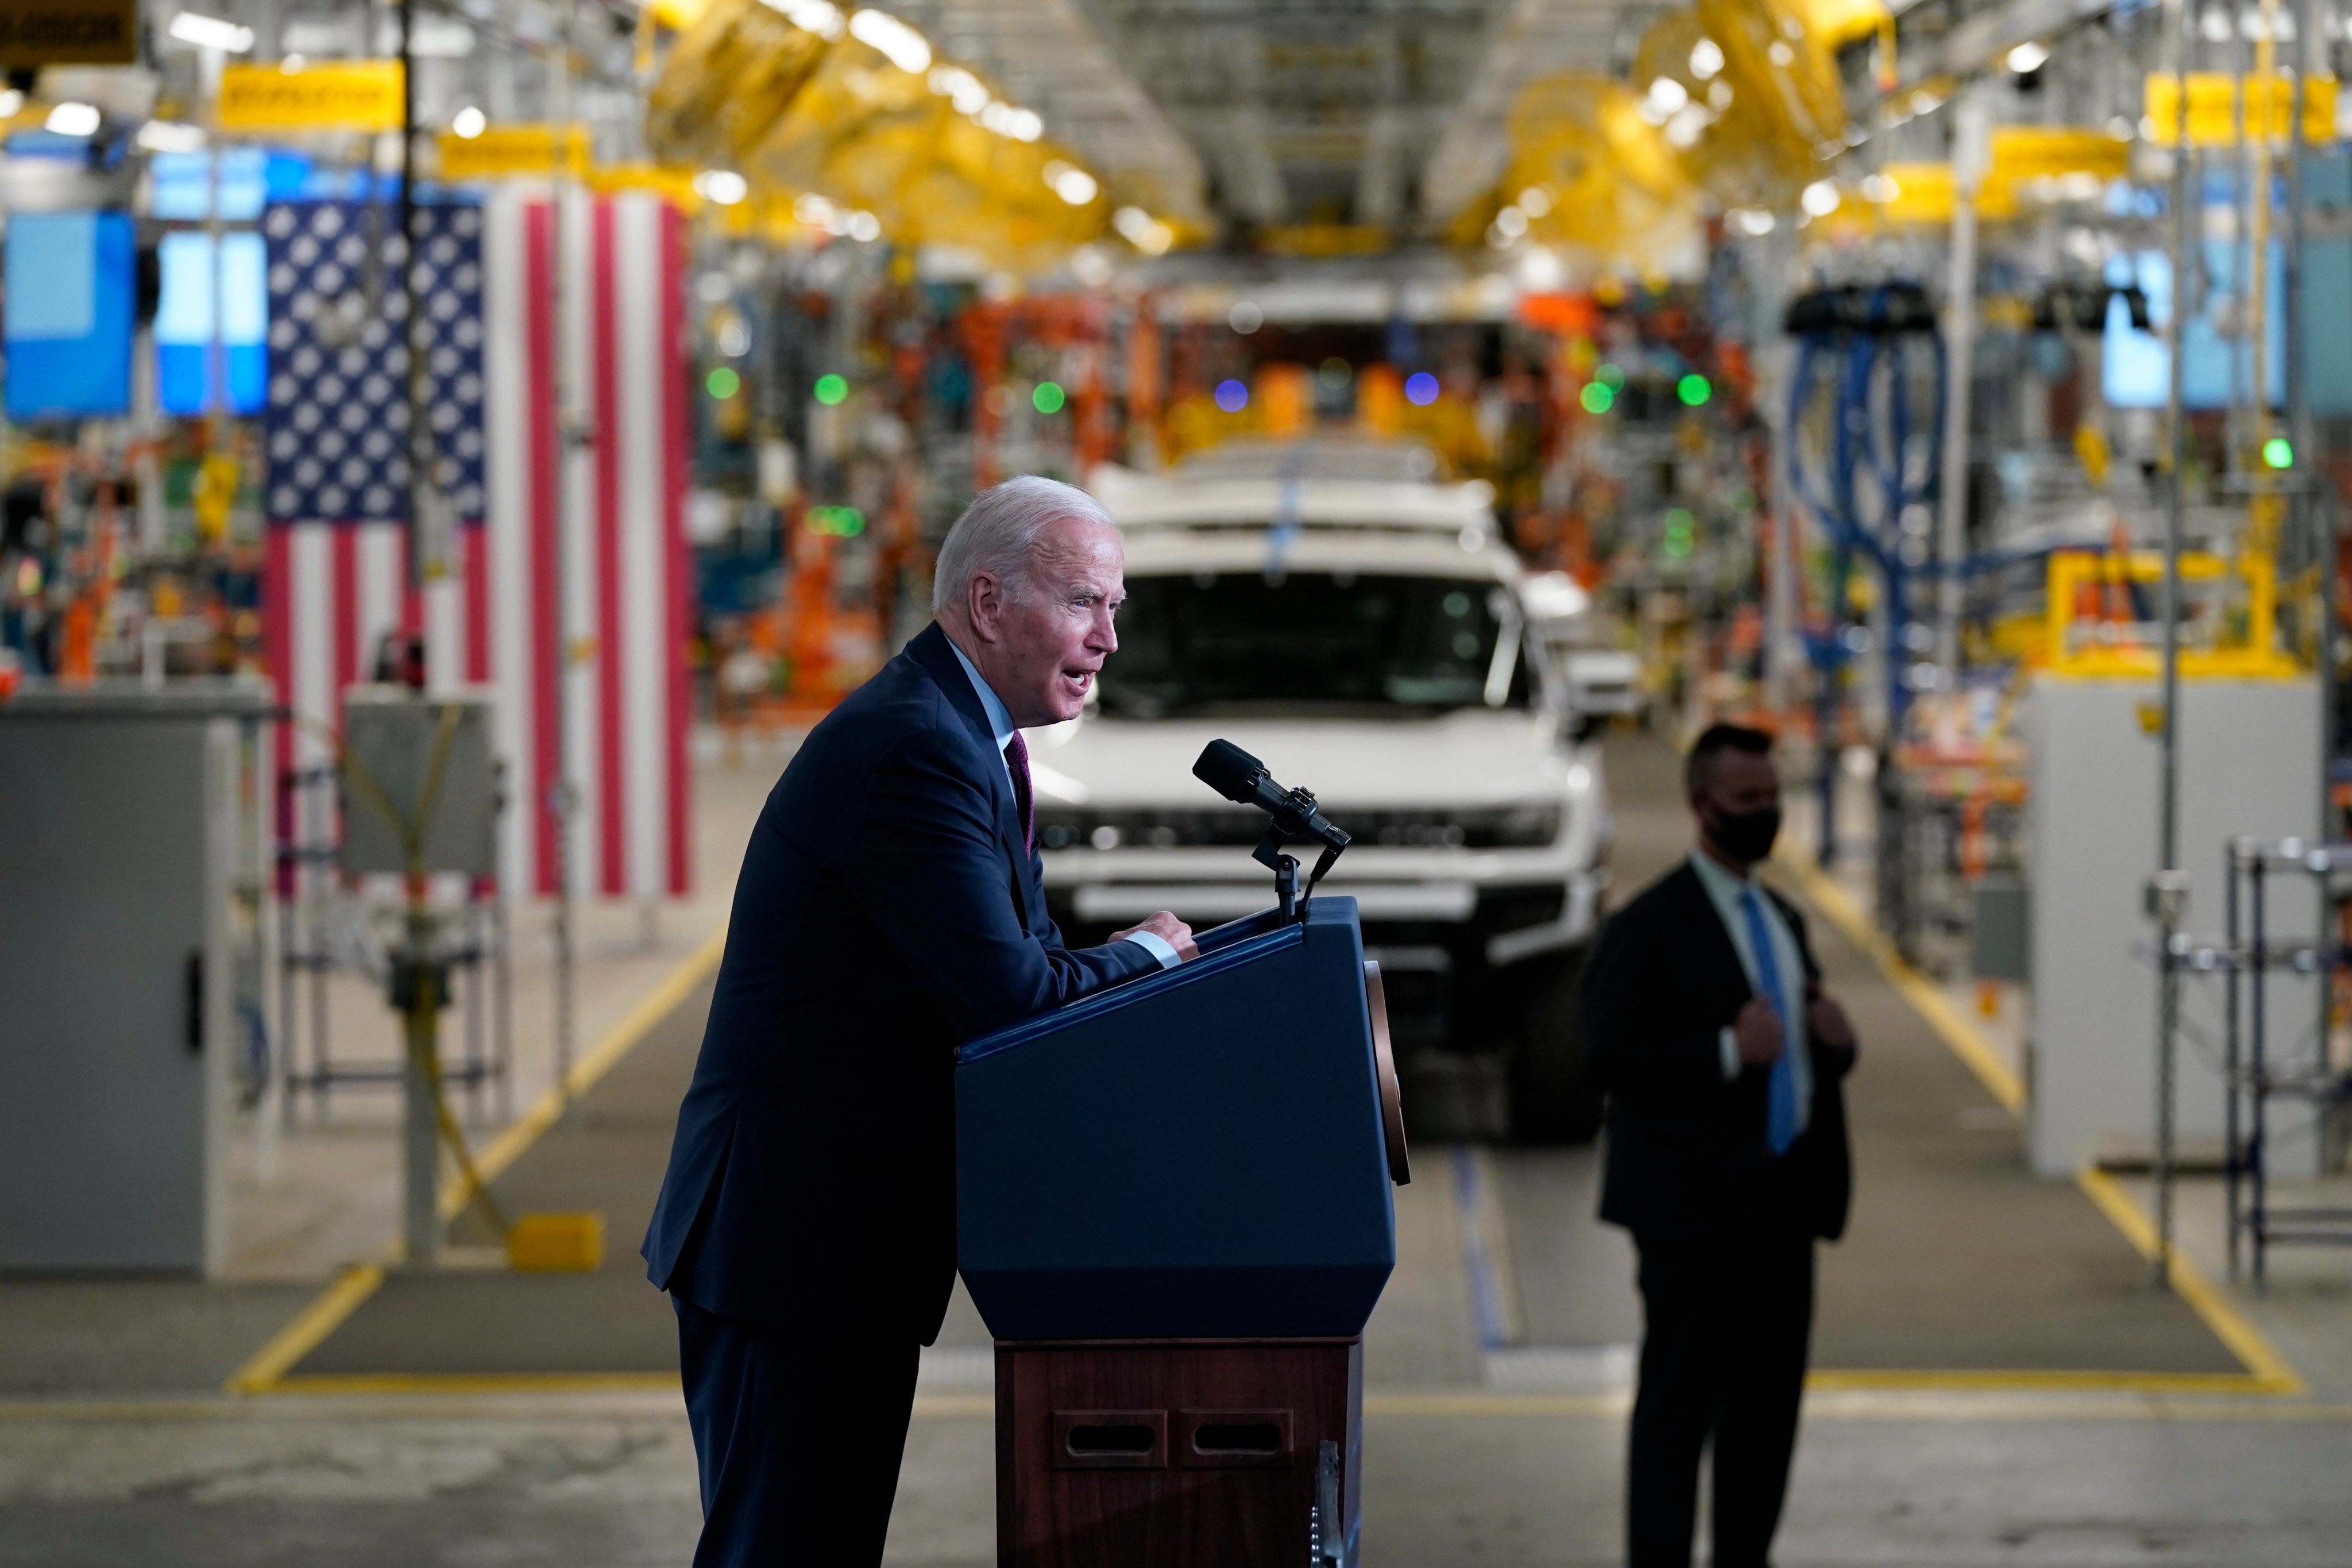 US President Joe Biden speaks during a visit to a General Motors electric vehicle assembly plant in Detroit. The Biden administration has increased subsidies to US manufacturers as part of its economic competition with China, adding pressure to an already-growing fiscal deficit. Photo: AP